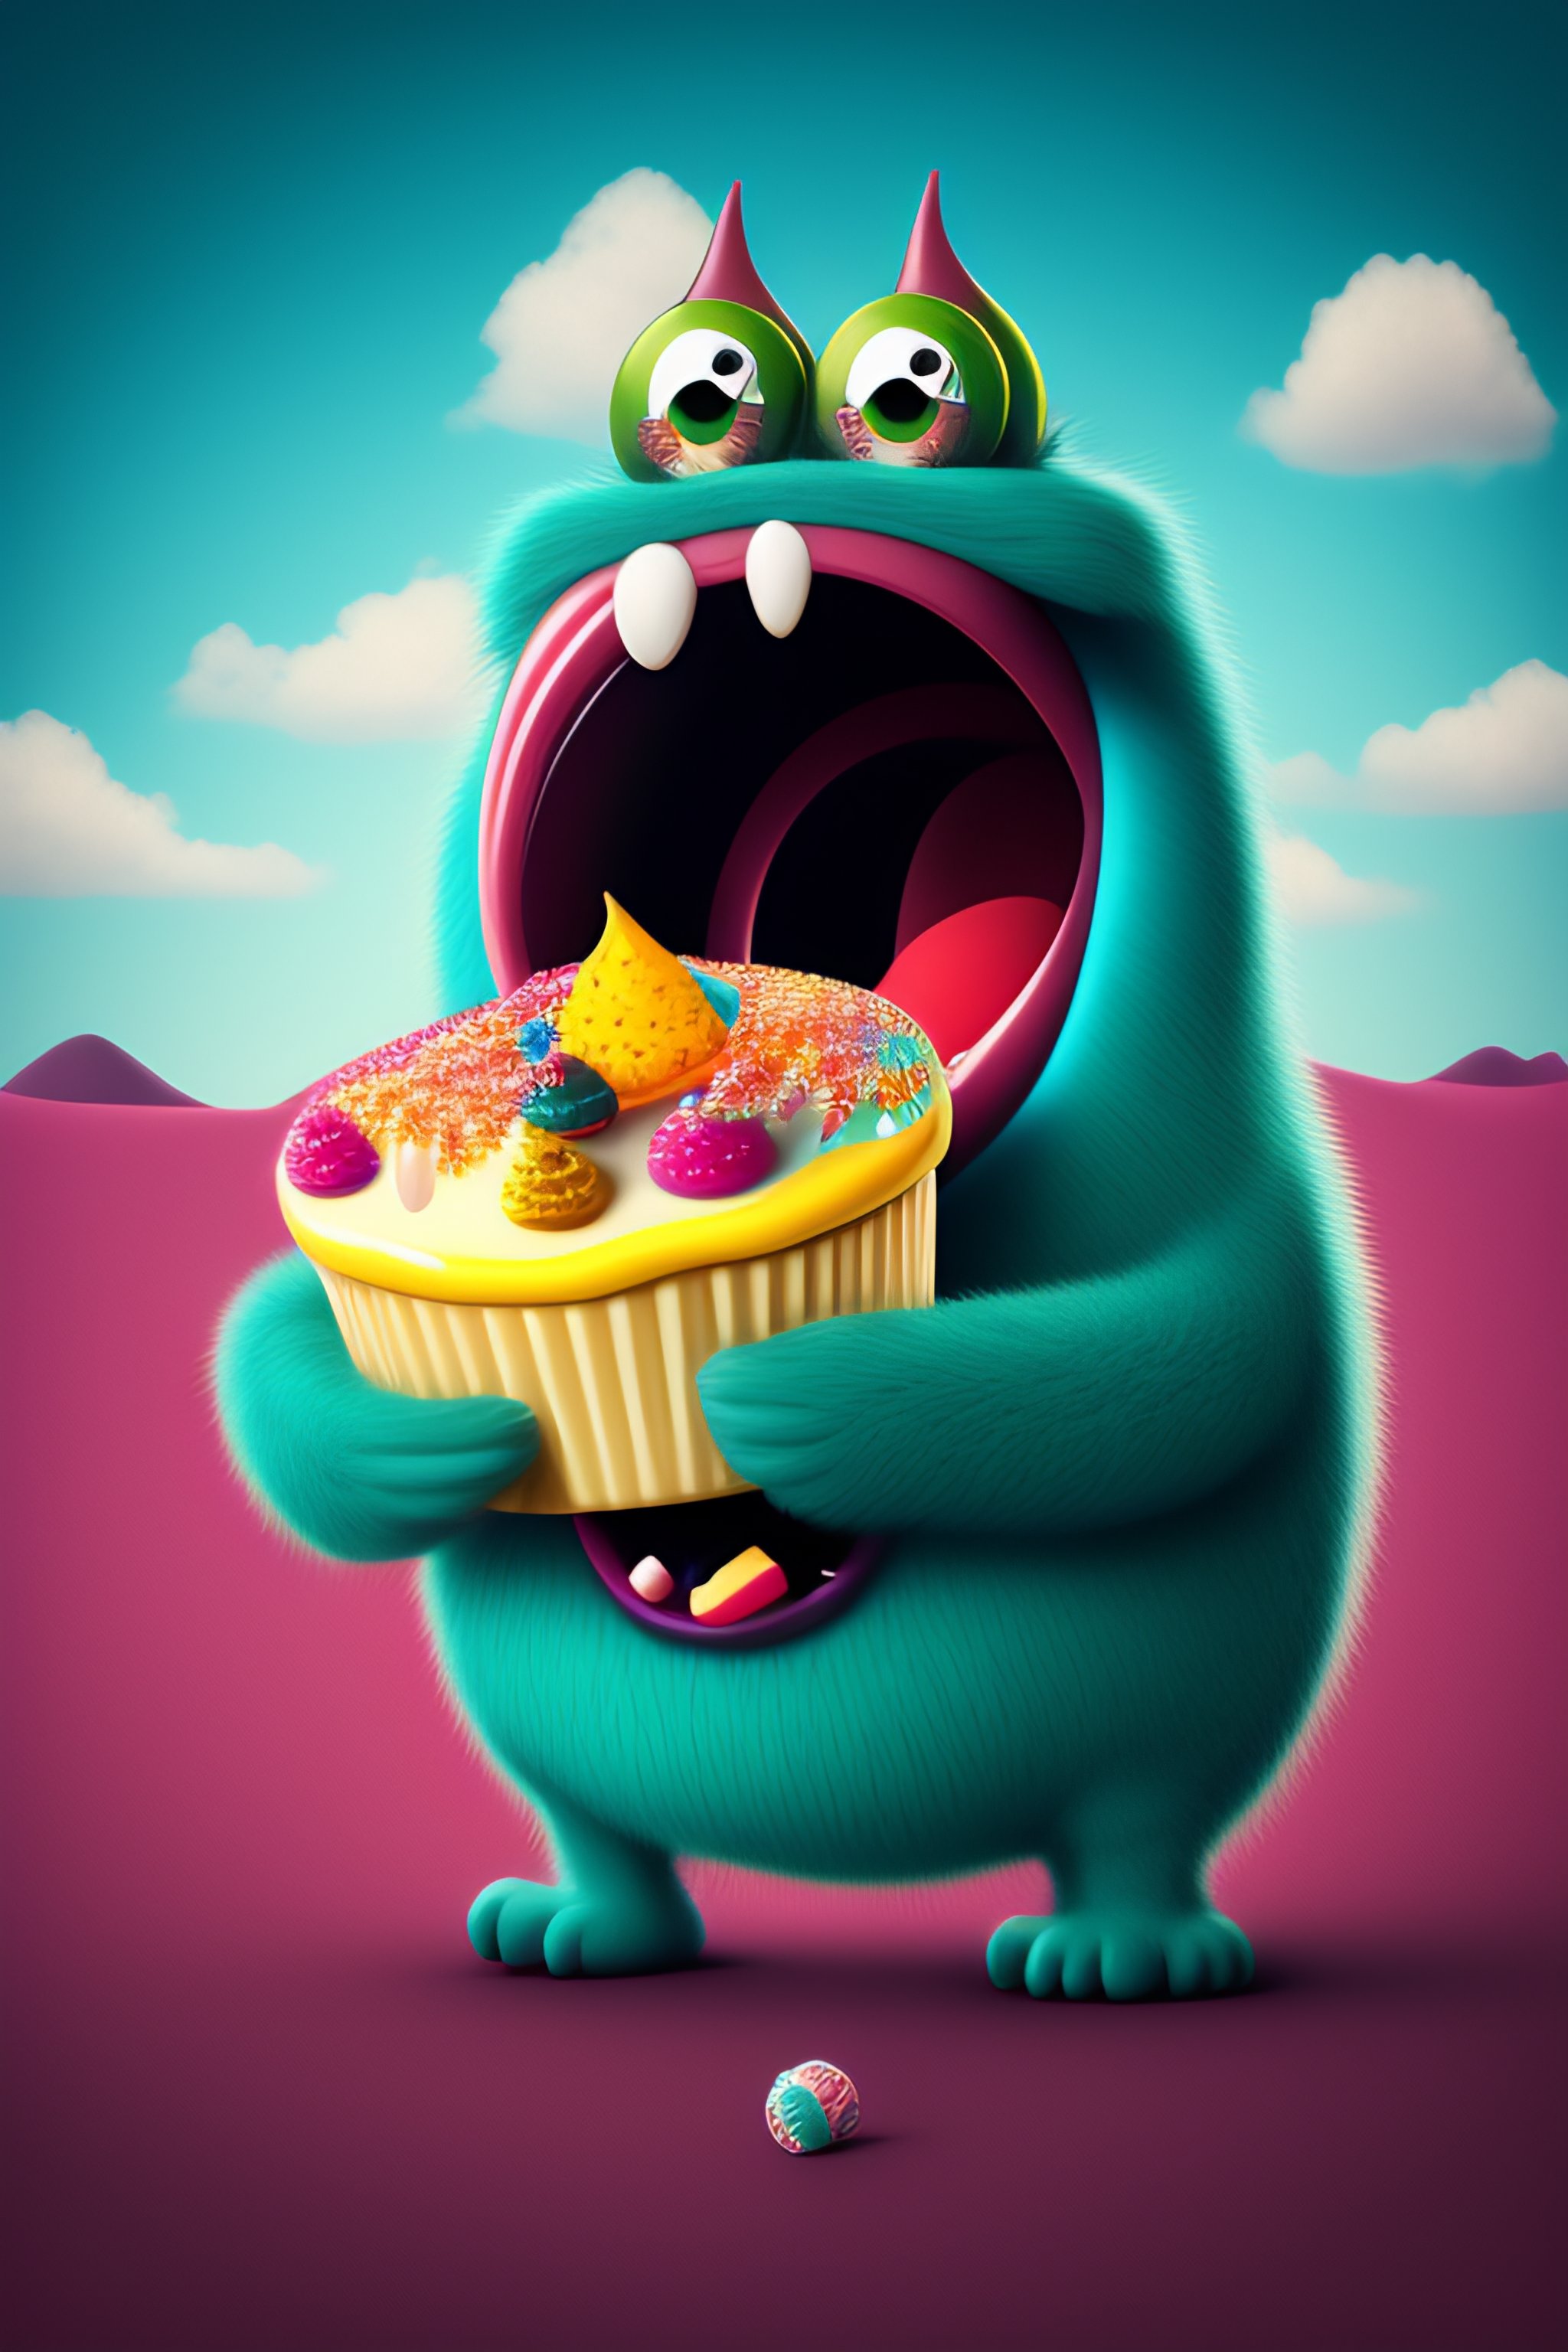 Lexica Cartoon Monster Eating Sweets